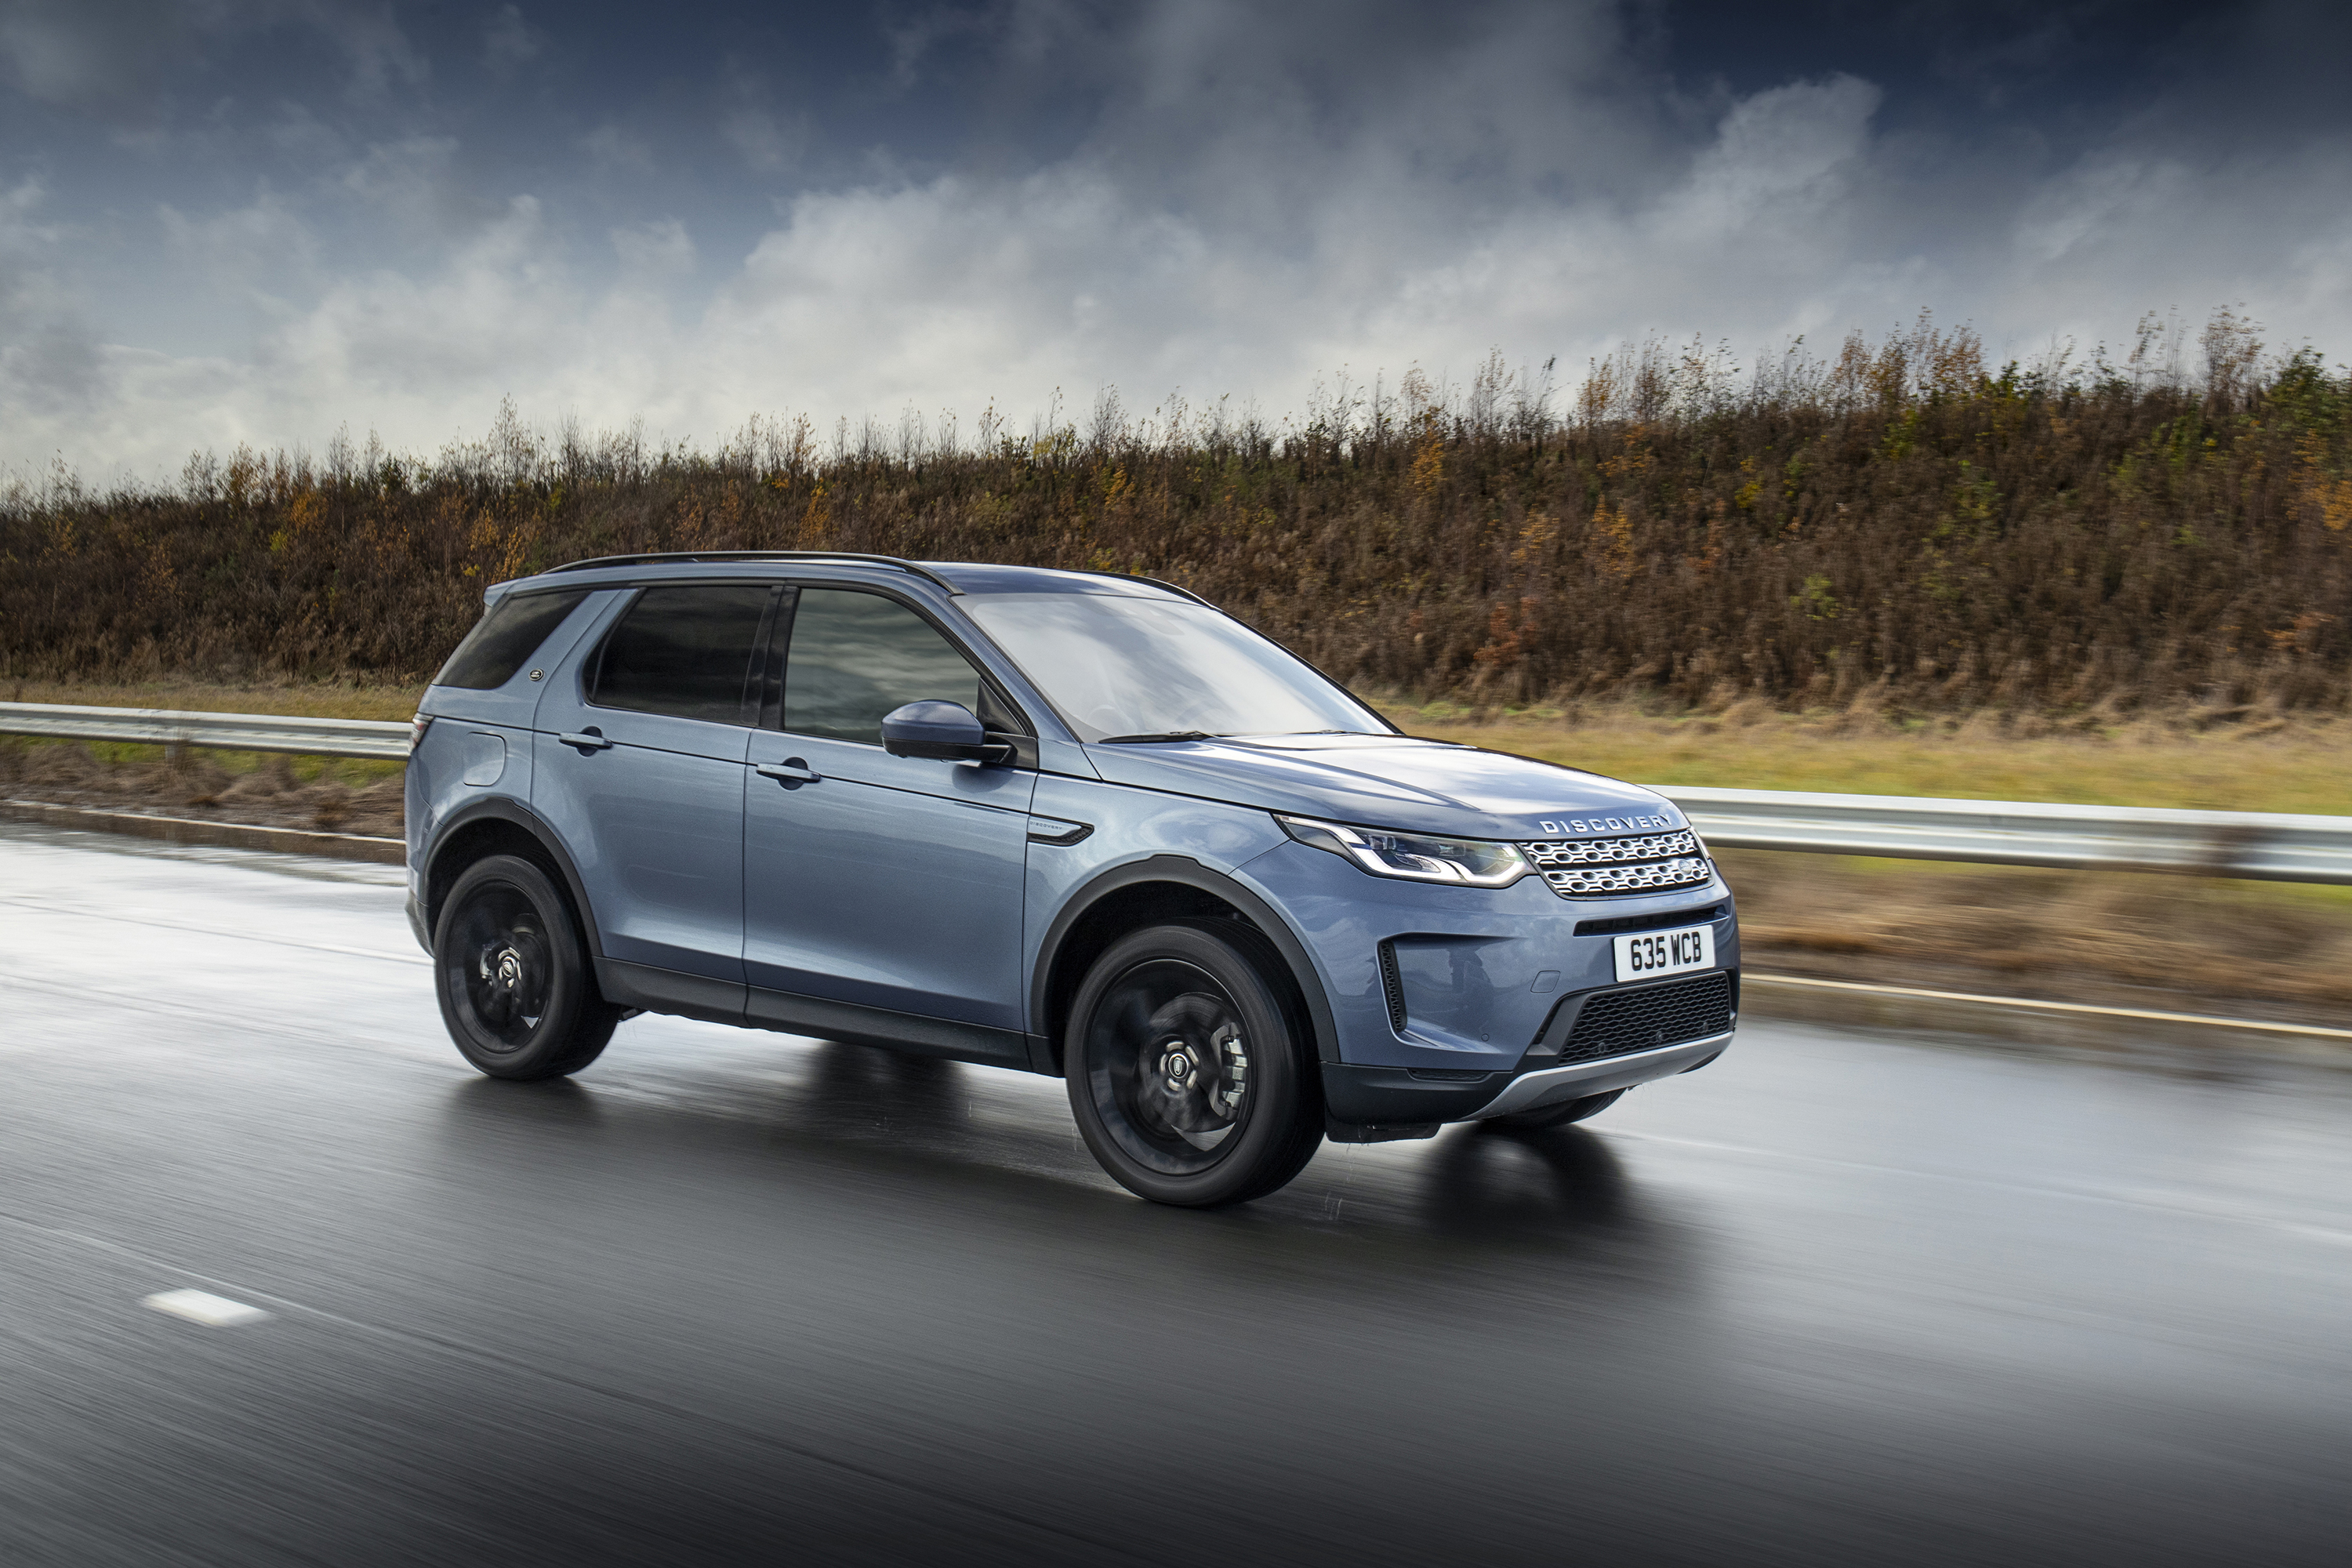 Дискавери 16. Land Rover Discovery Sport 2021. Range Rover Discovery Sport 2021. Рендж Ровер Дискавери 2021. Рендж Ровер Дискавери 2022.